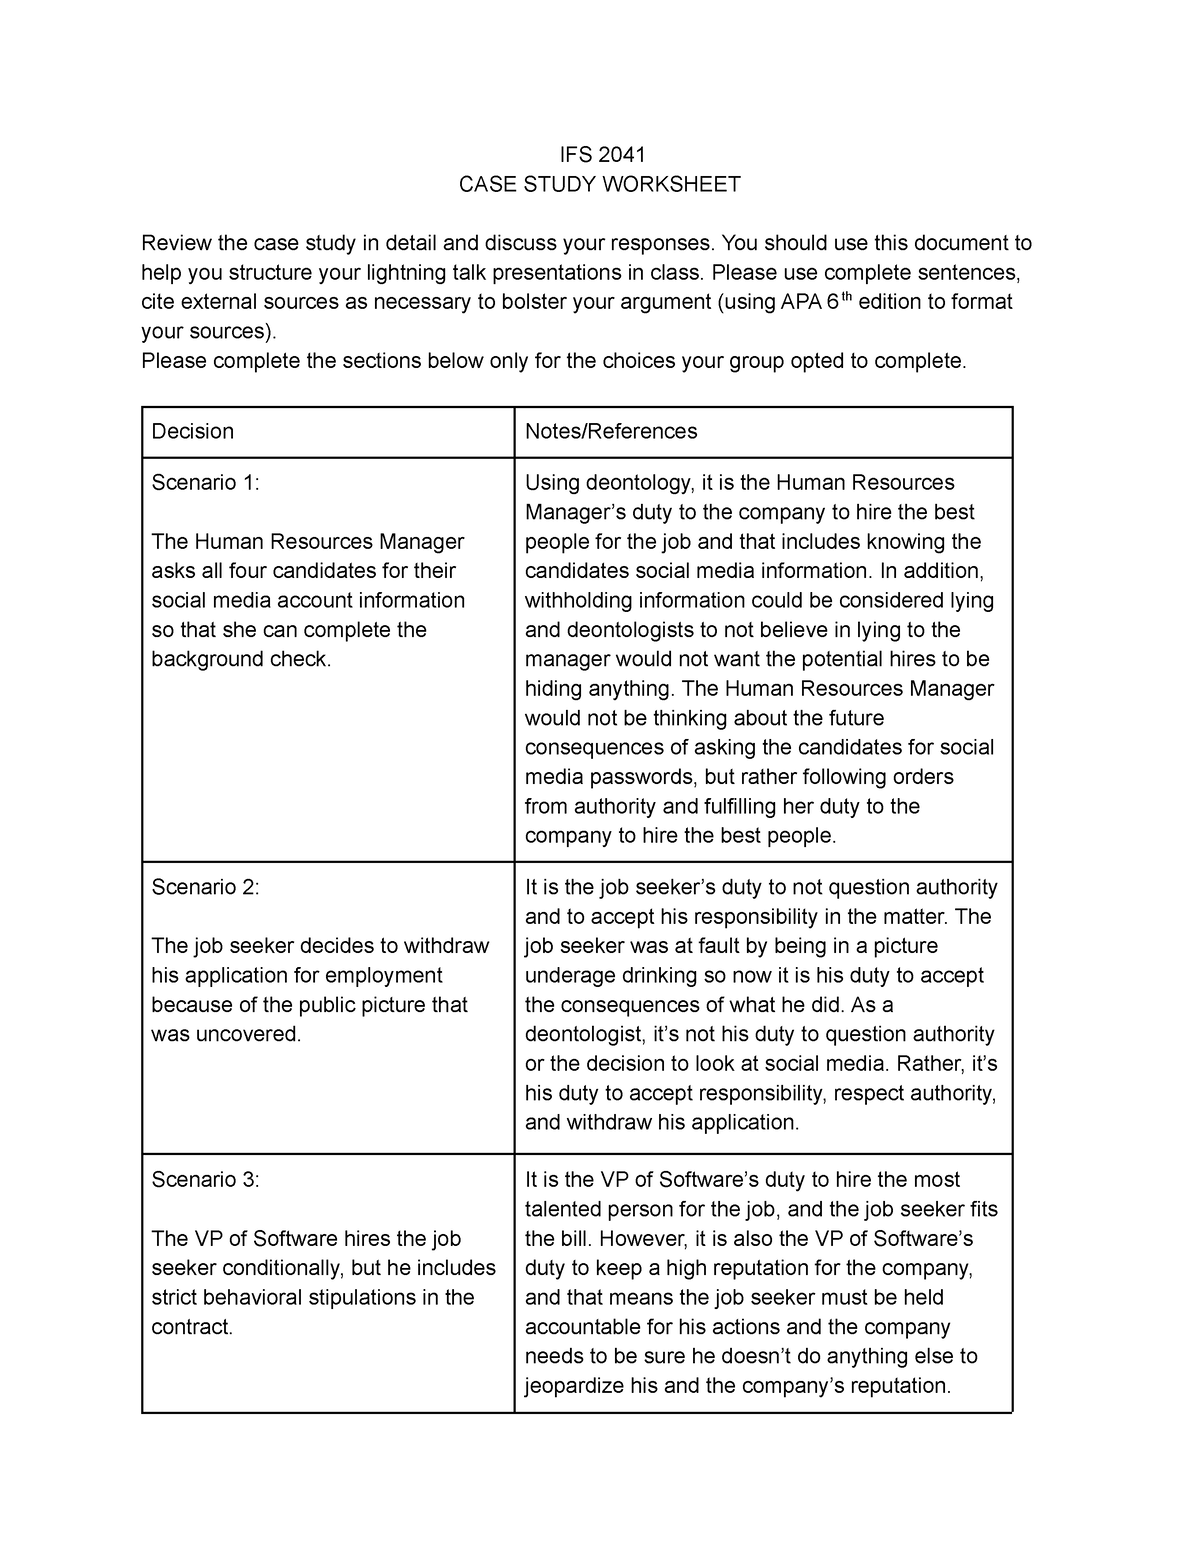 completed-case-study-worksheet-ifs-2041-case-study-worksheet-review